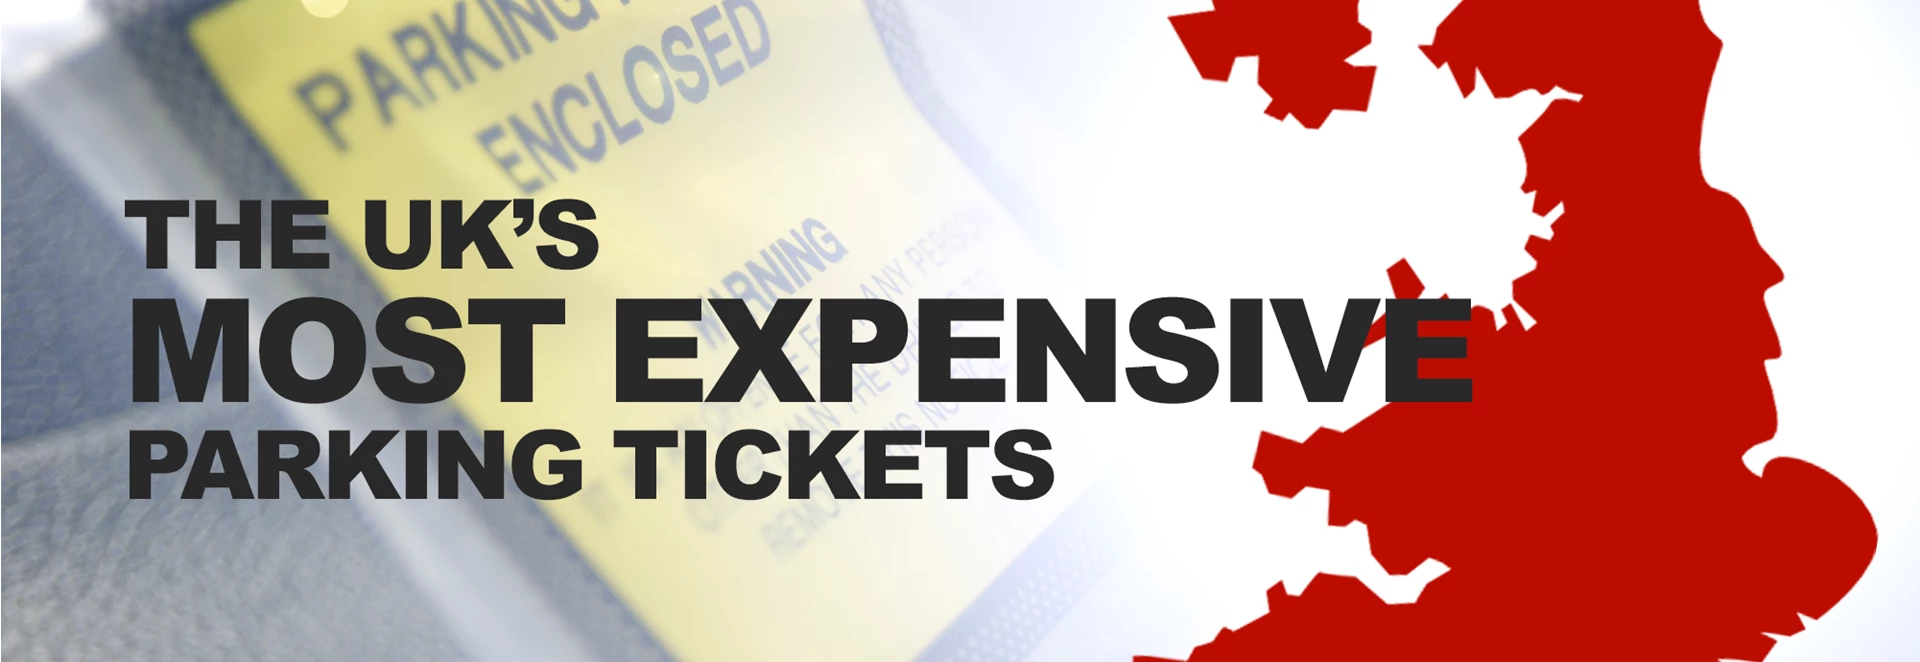 Revealed: The UK's most expensive parking tickets 